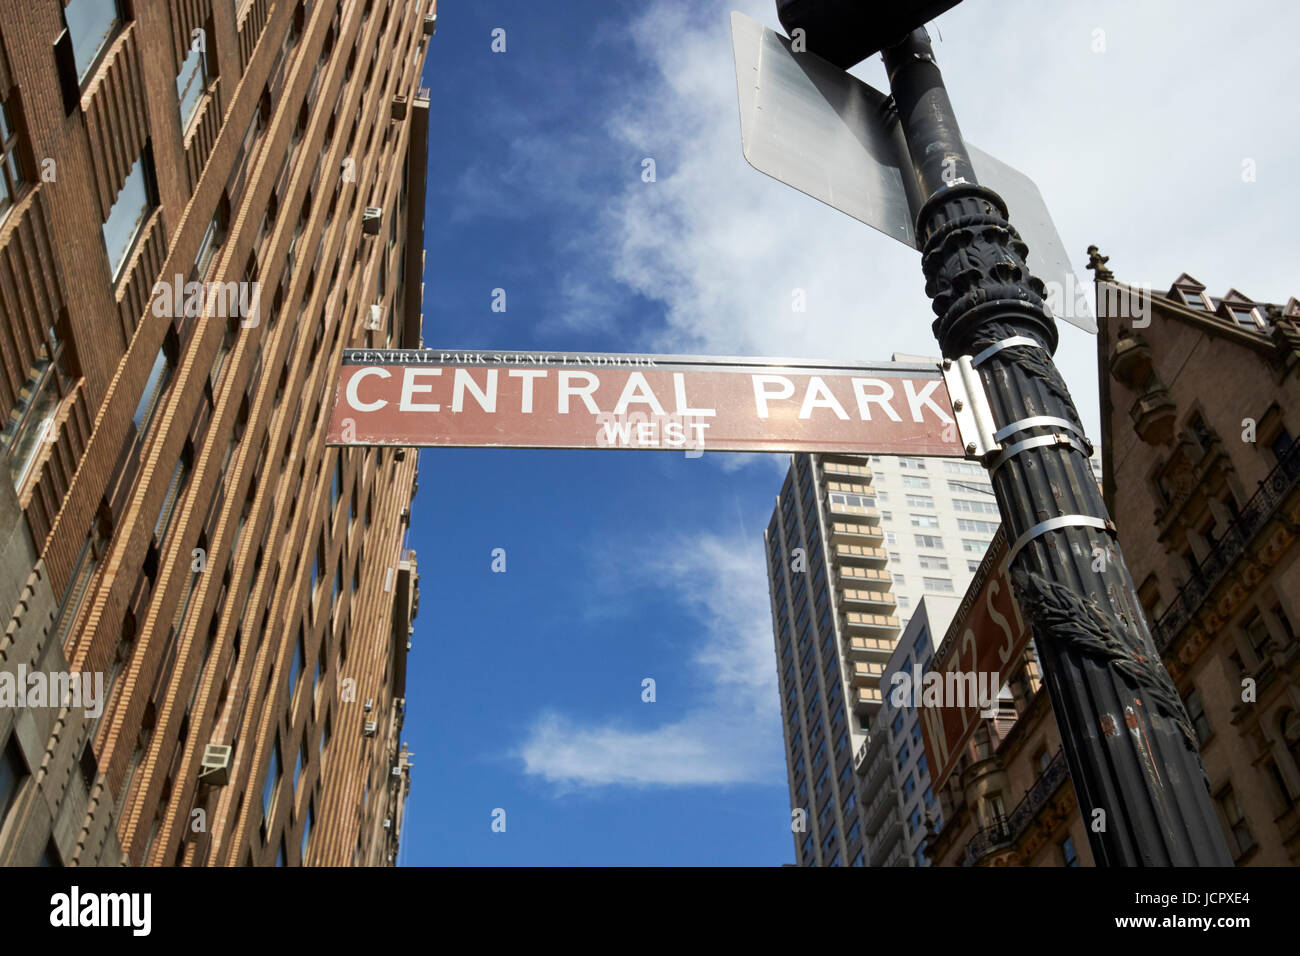 city brown street sign for central park west New York City USA Stock Photo